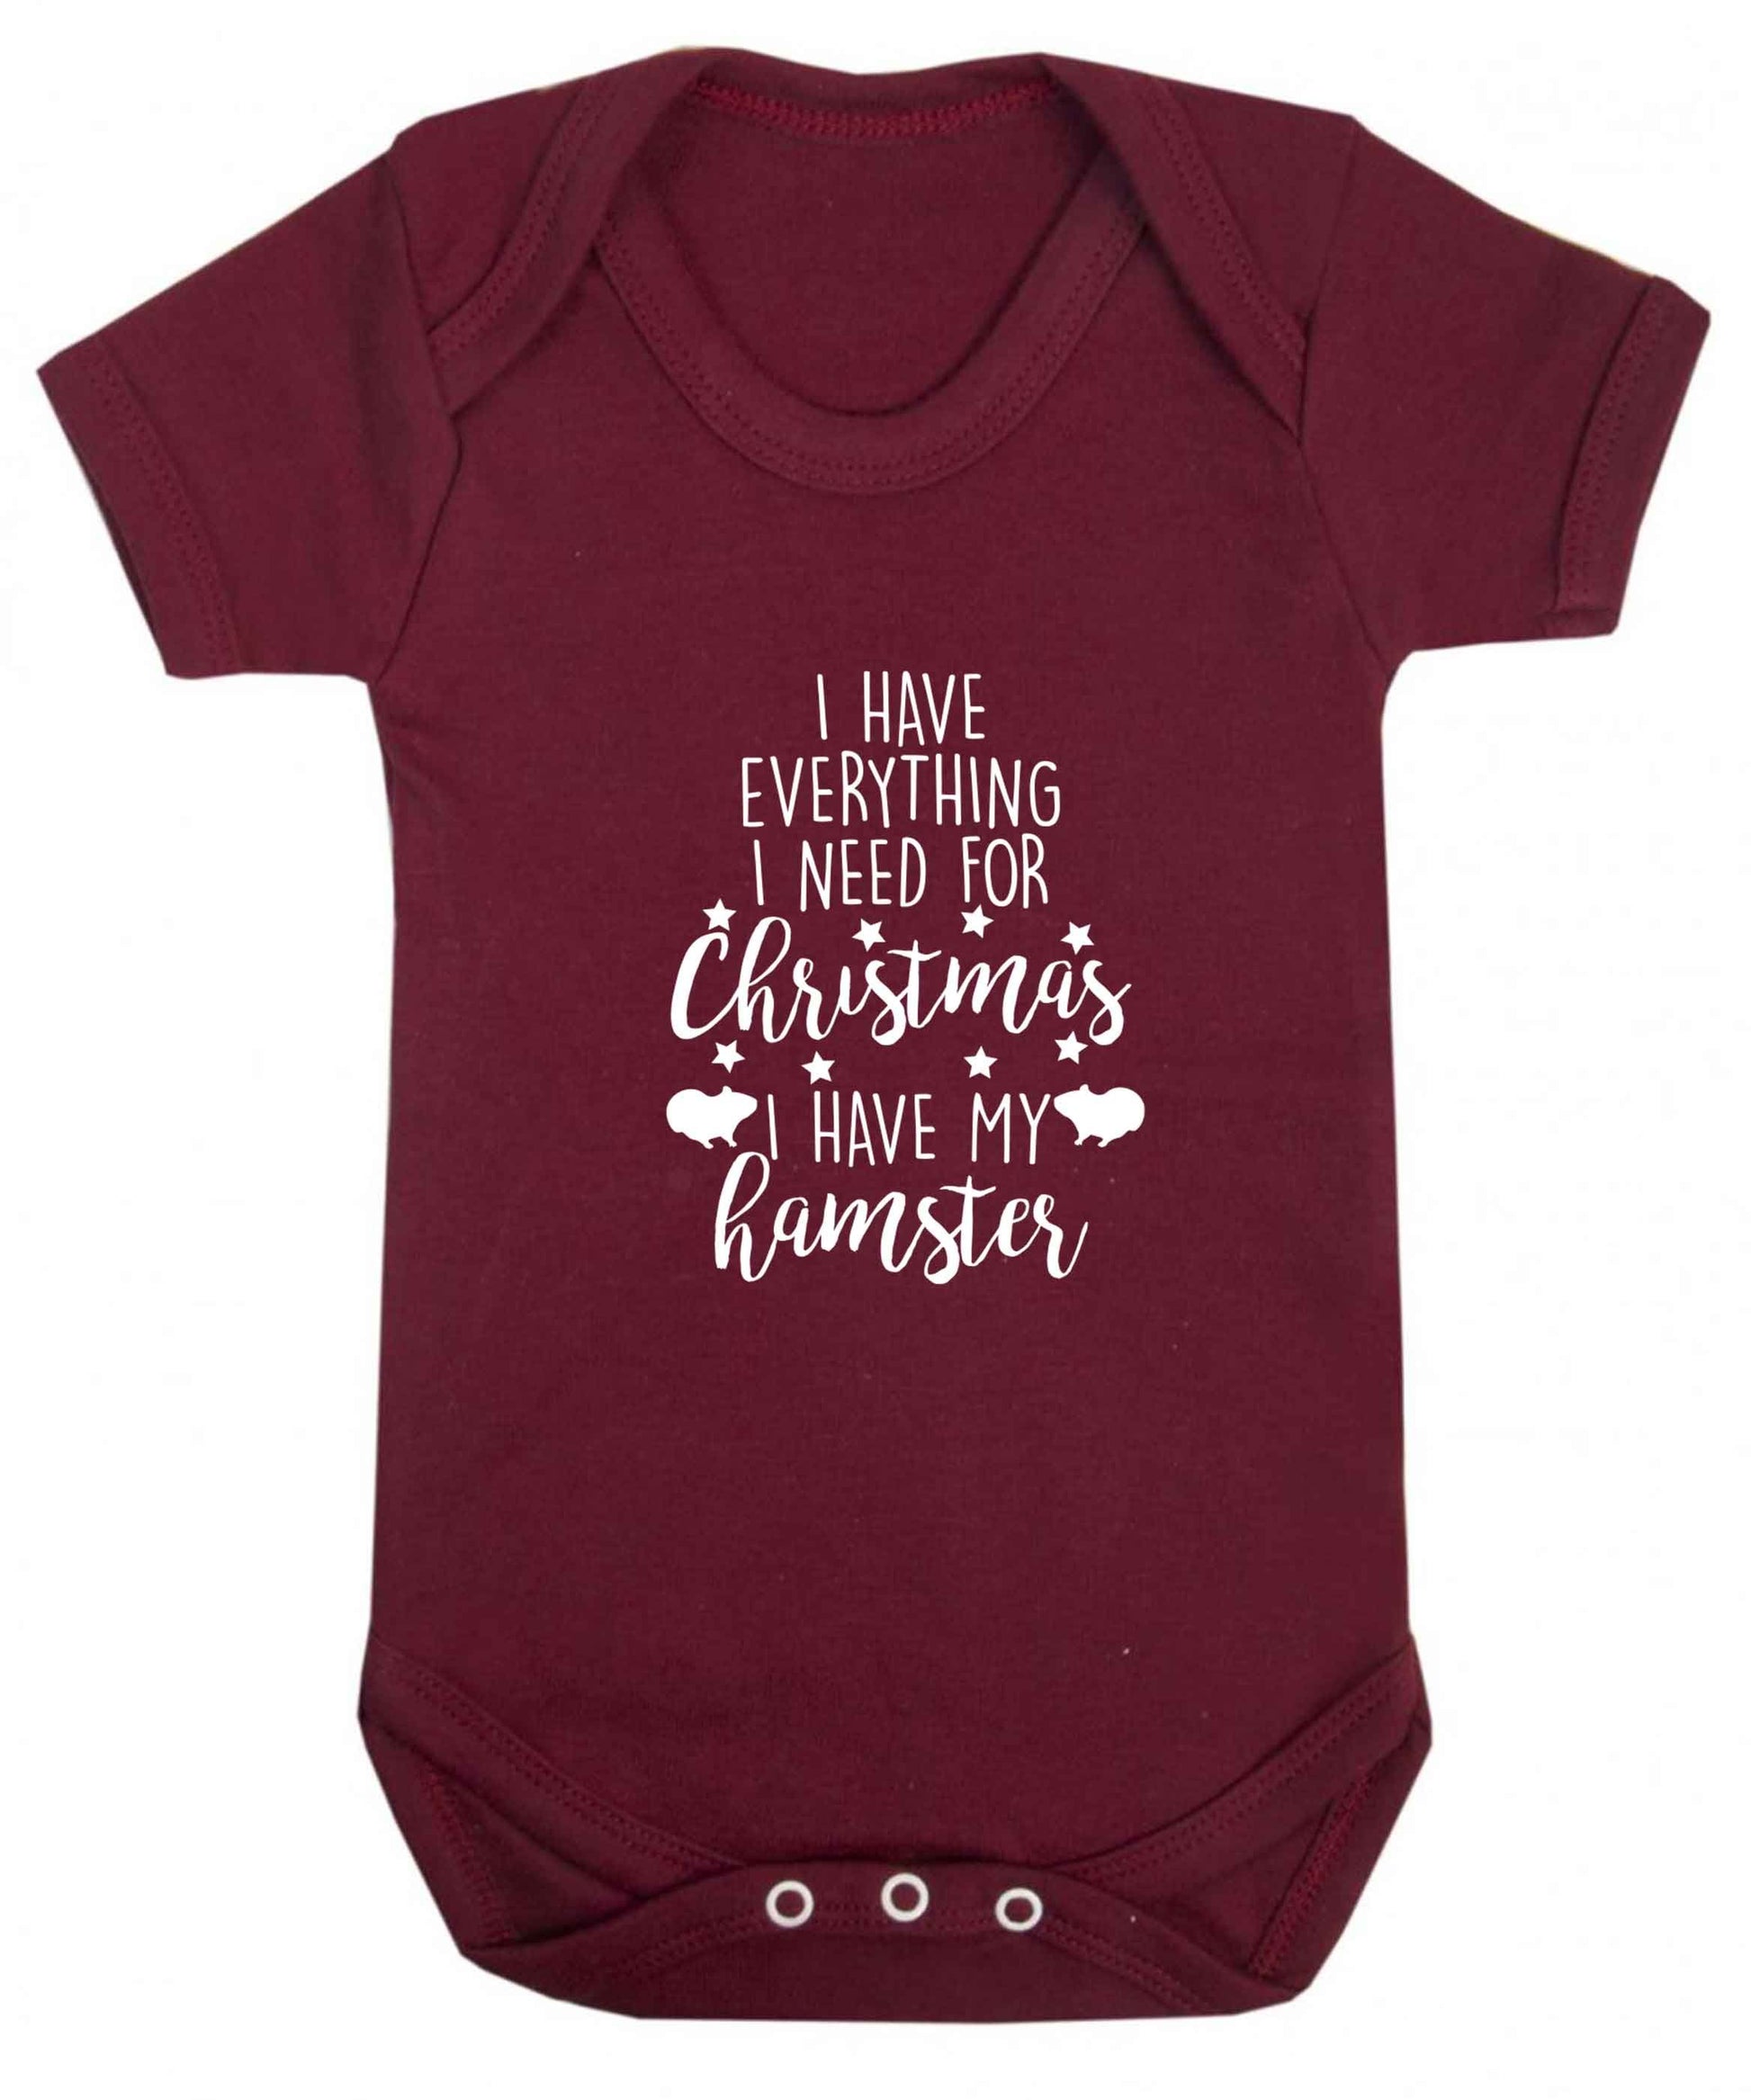 I have everything I need for Christmas I have my hamster baby vest maroon 18-24 months